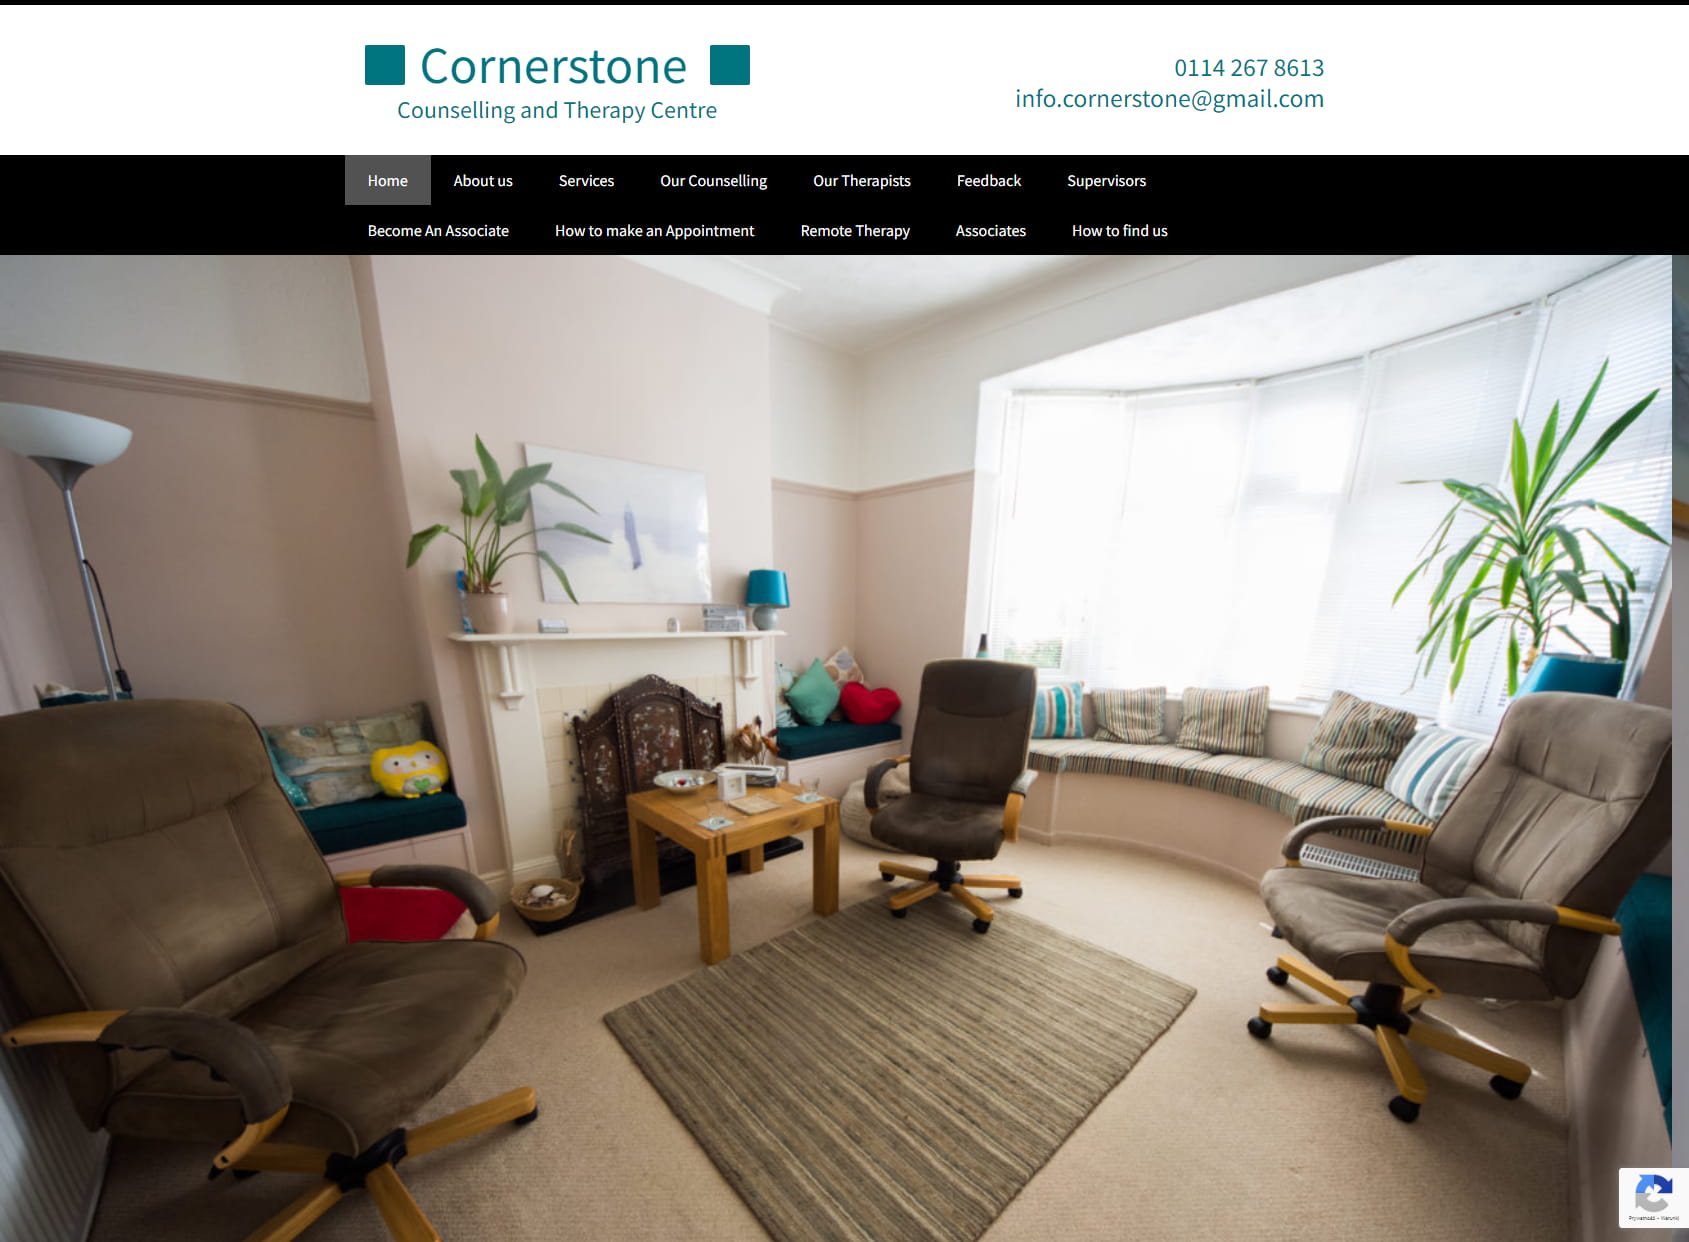 Cornerstone Counselling and Therapy Centre